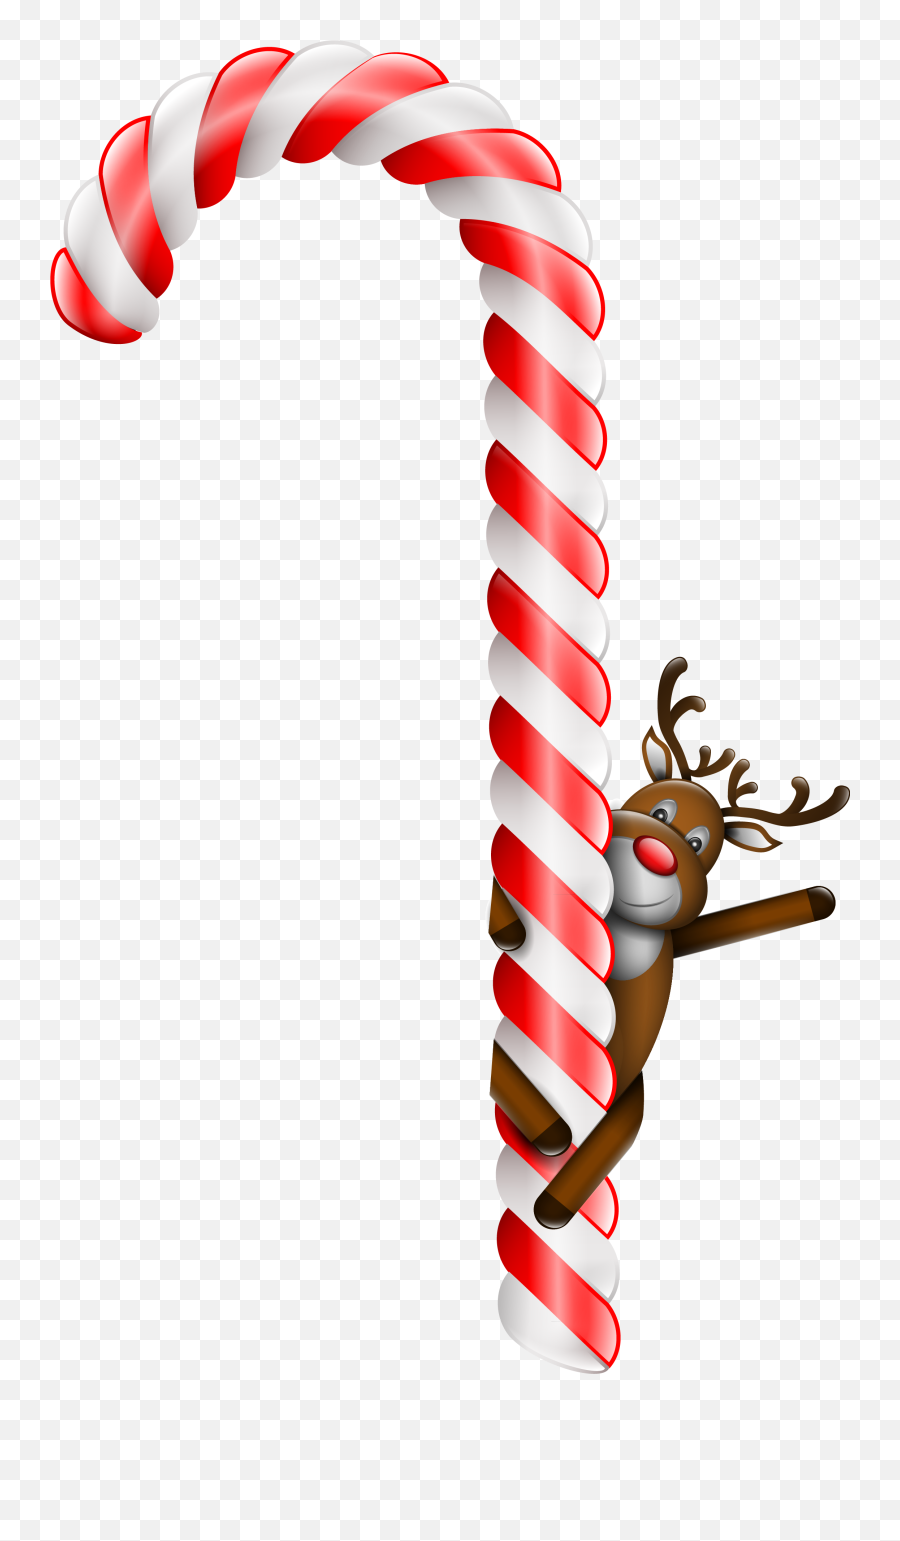 Free Candy Cane Clipart Transparent - Christmas Candy Cane Transparent Background Png,Candy Cane Transparent Background